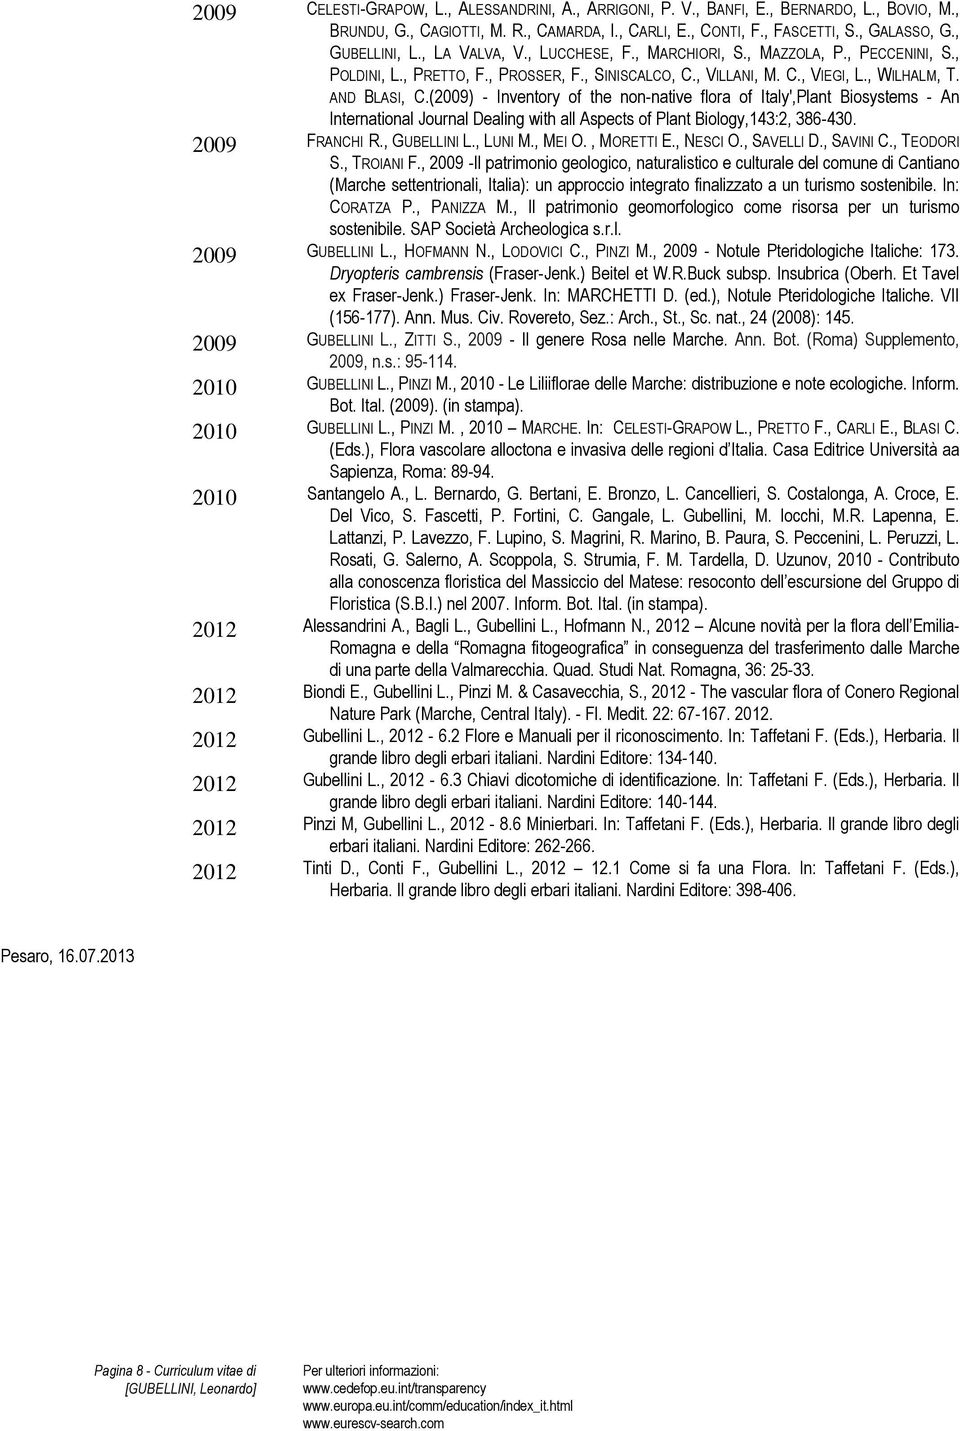 (2009) - Inventory of the non-native flora of Italy',Plant Biosystems - An International Journal Dealing with all Aspects of Plant Biology,143:2, 386-430. 2009 FRANCHI R., GUBELLINI L., LUNI M.